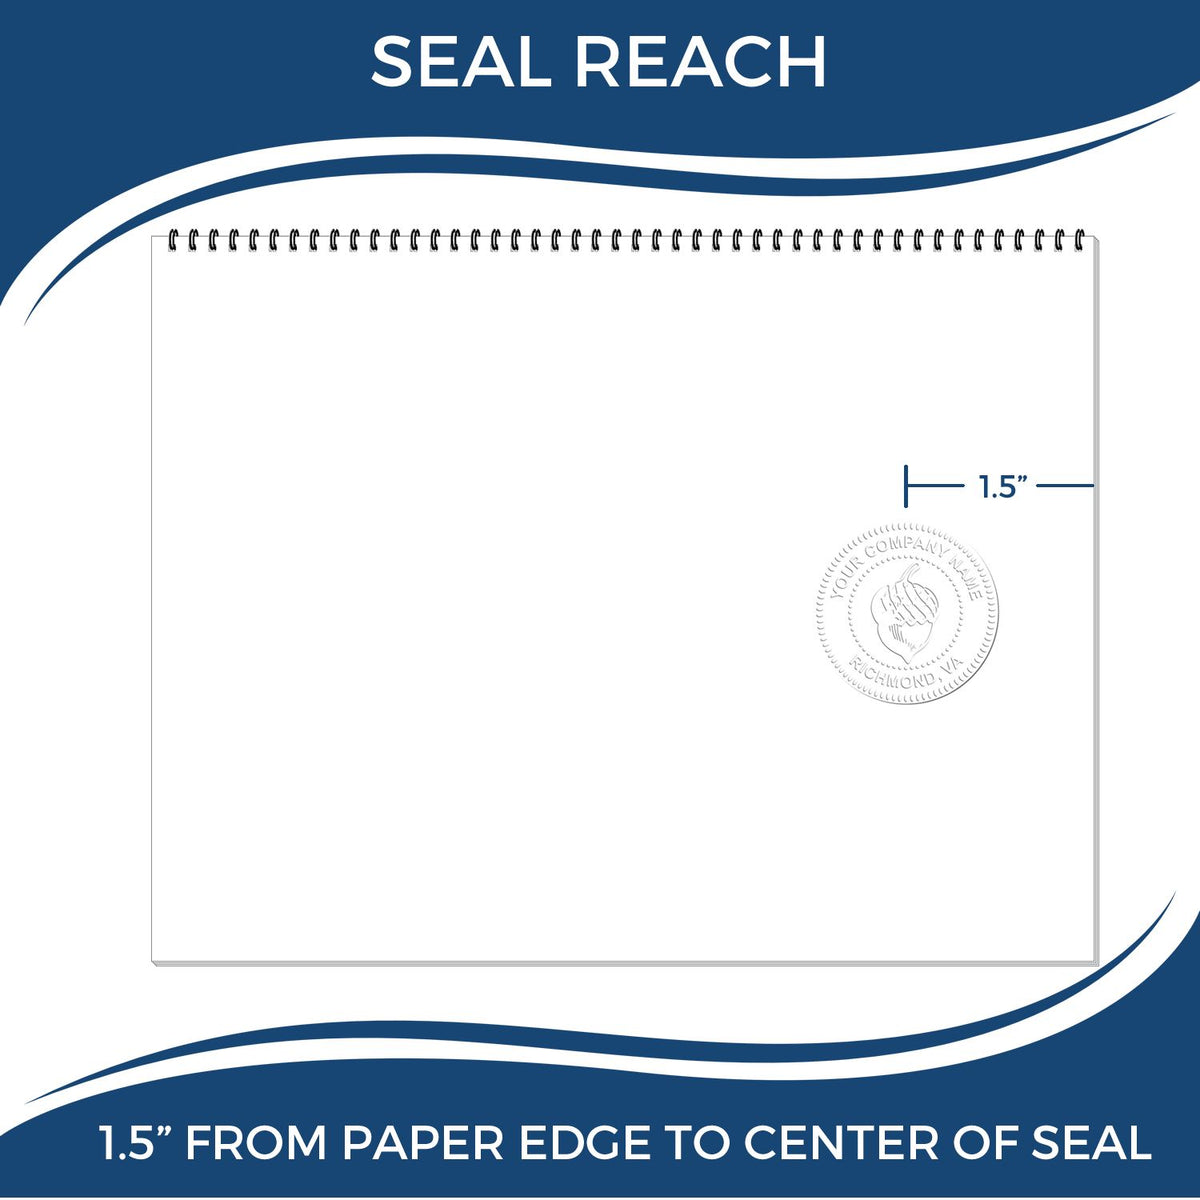 An infographic showing the seal reach which is represented by a ruler and a miniature seal image of the Handheld Maryland Land Surveyor Seal